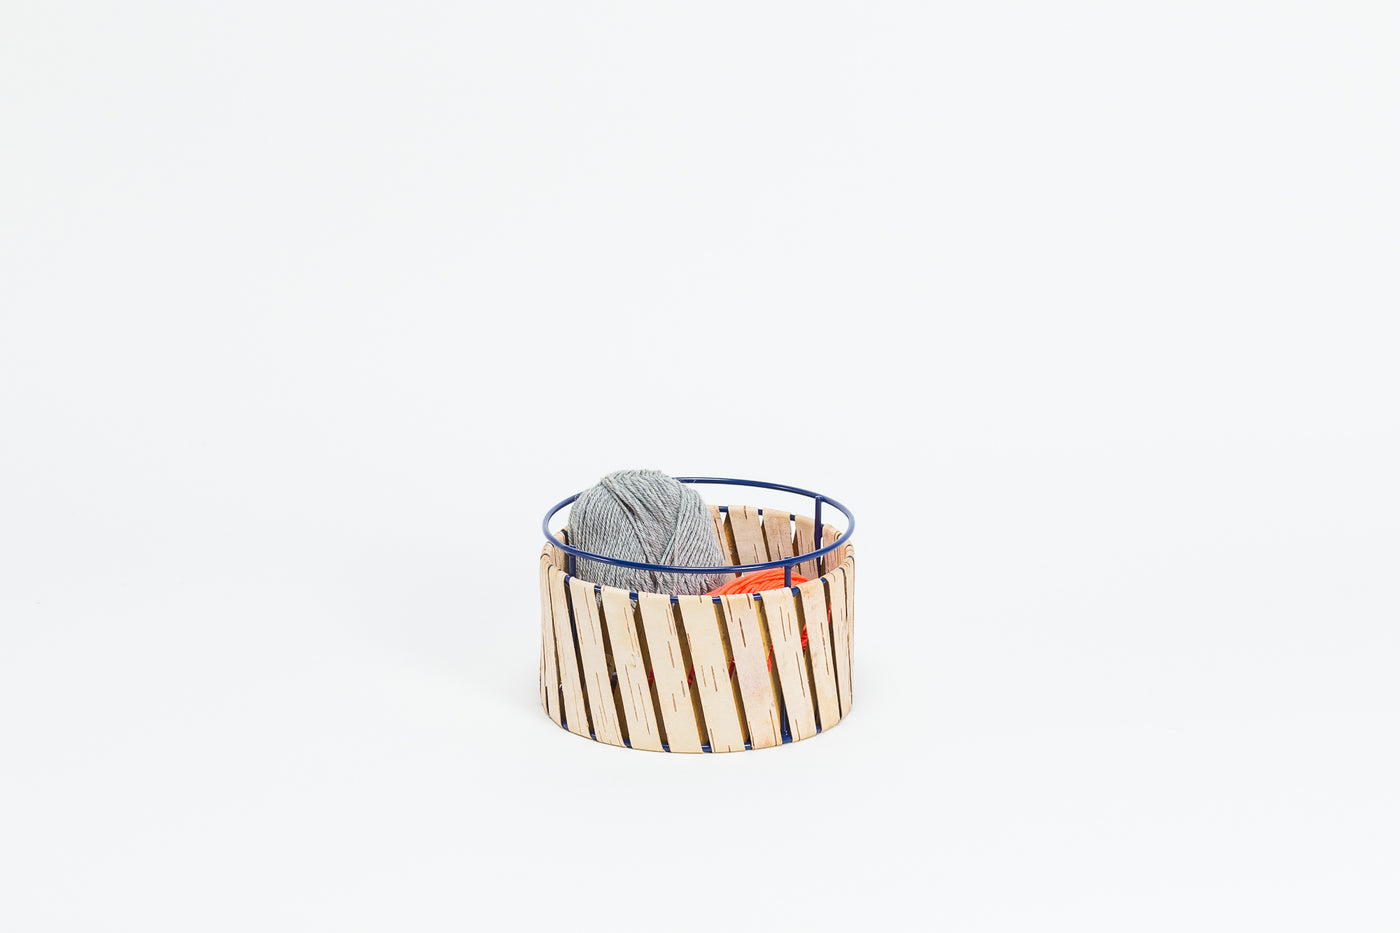 Korob Korv Birch Bark Basket-Storing and Organising-BIRCH BARK, BOXES / ORGANISERS / CONTAINERS-Forest Homes-Nature inspired decor-Nature decor